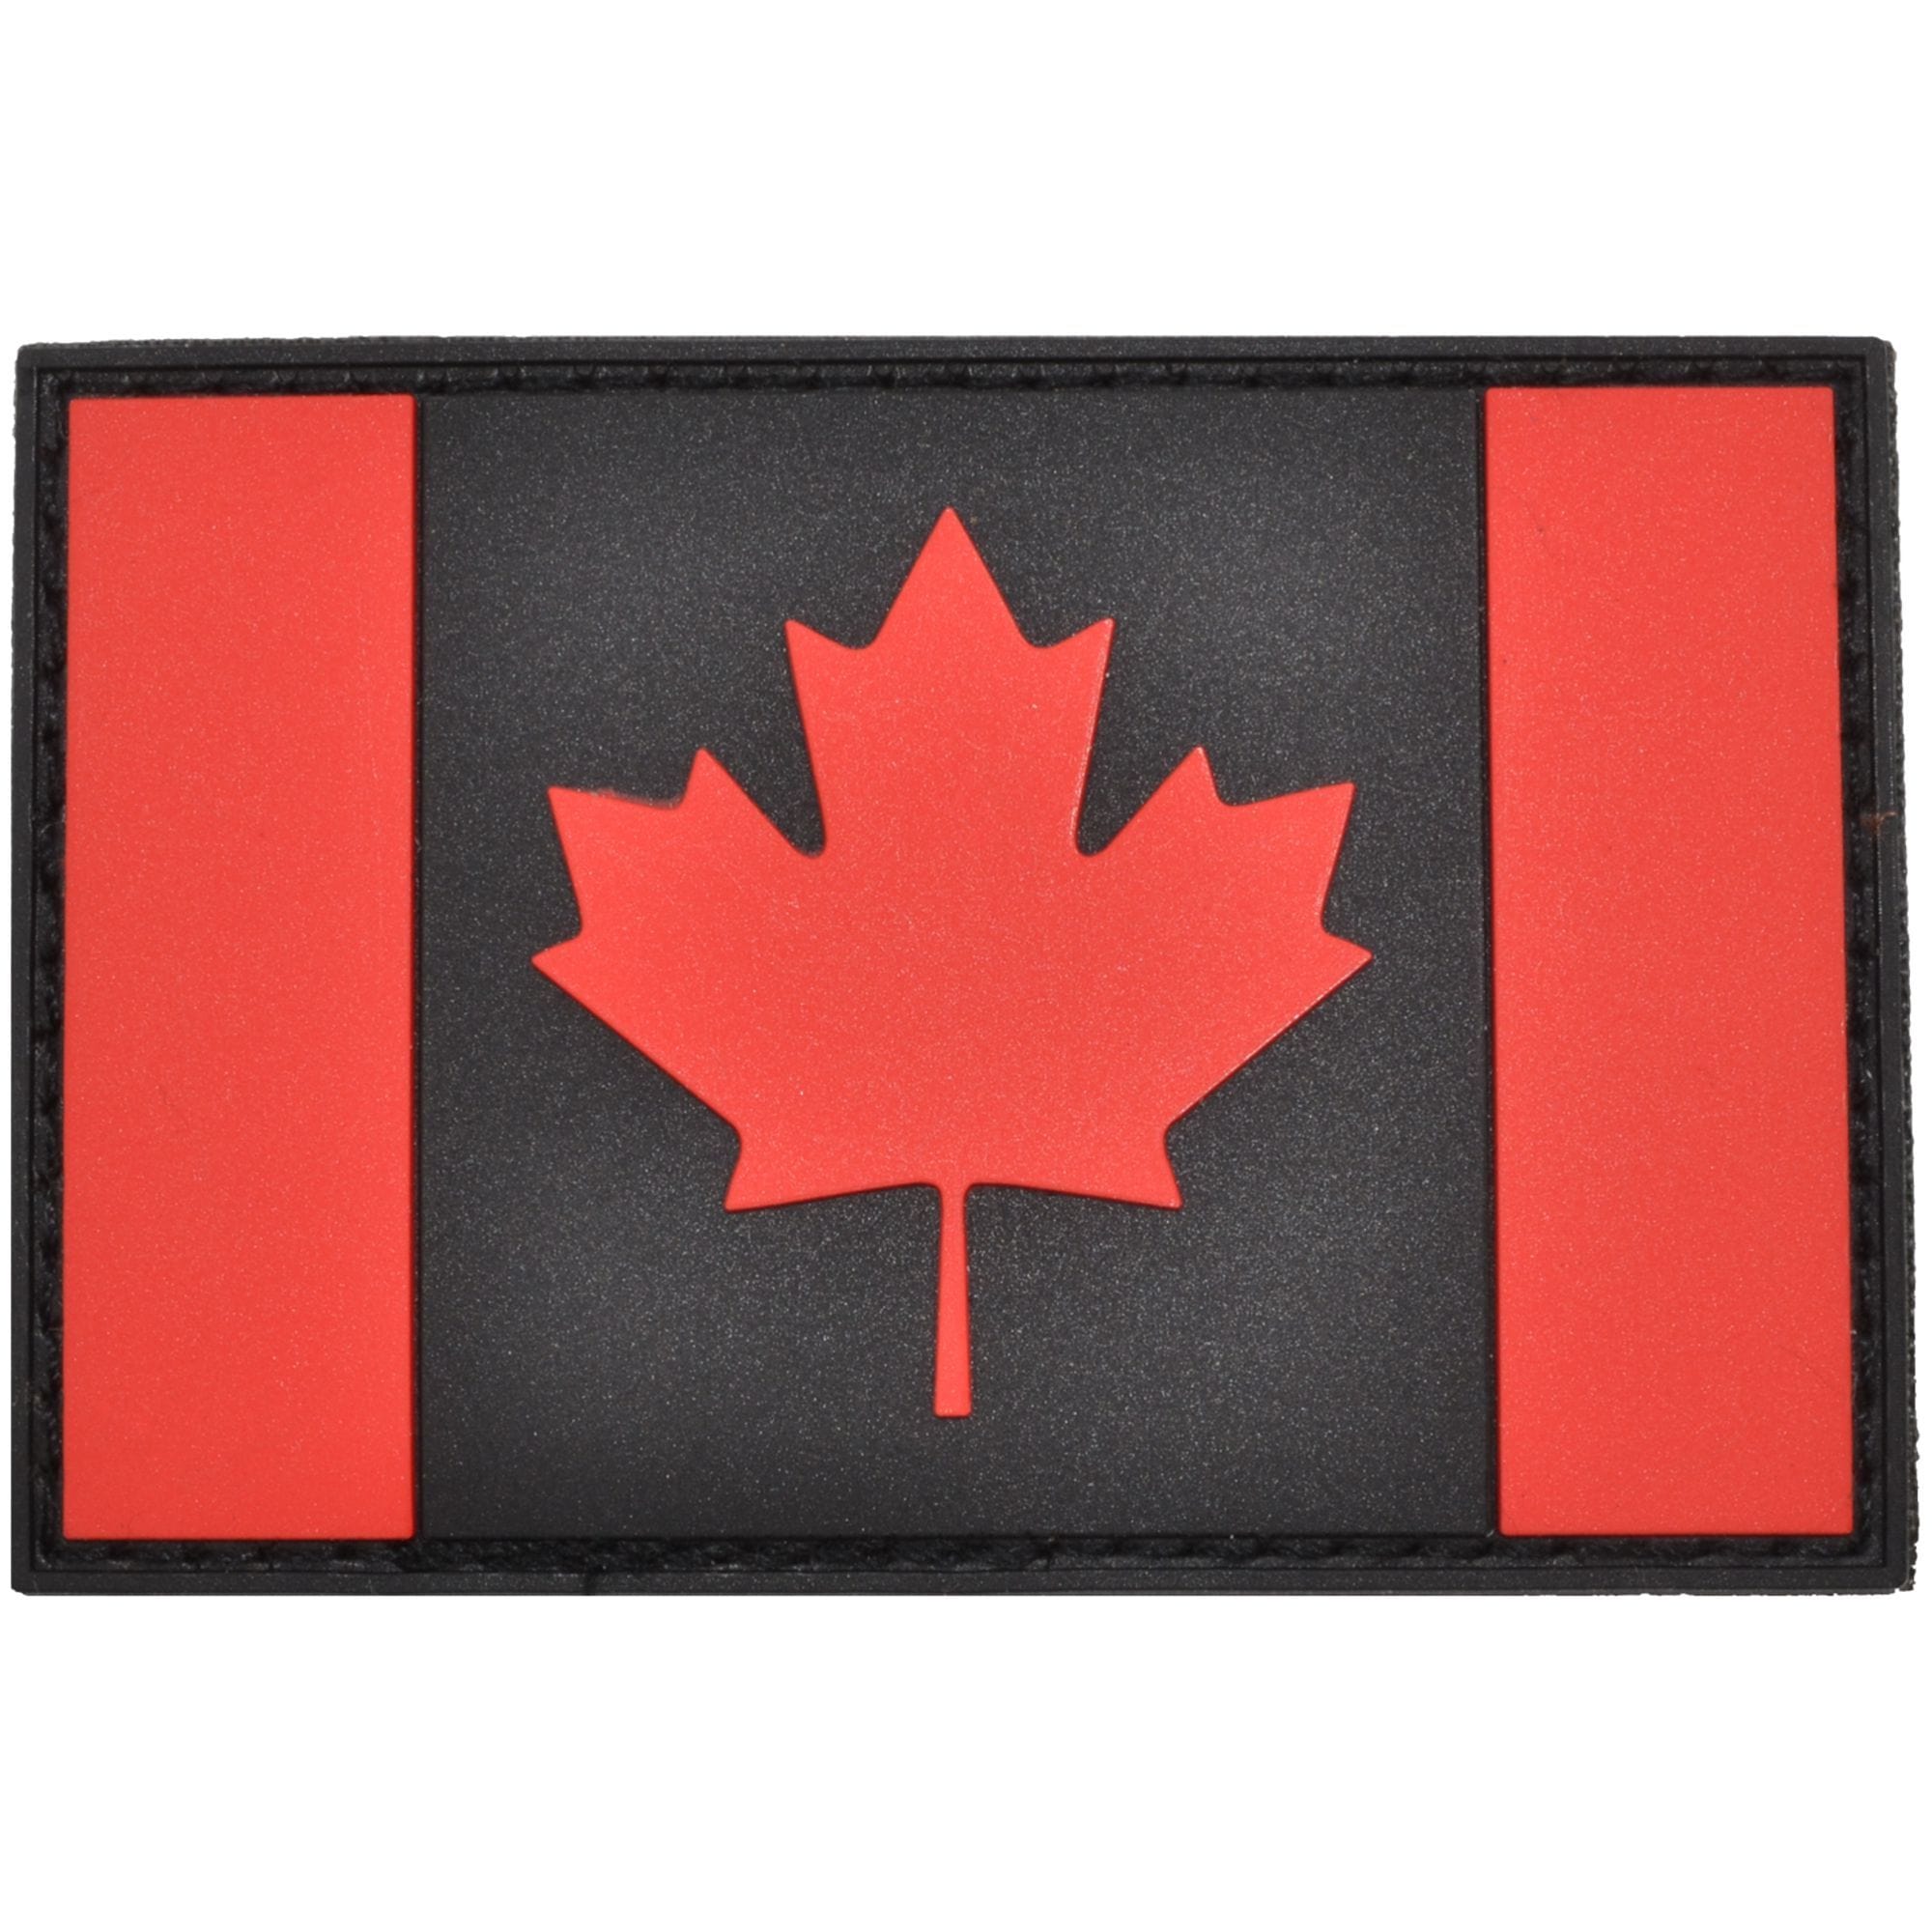 Tactical Gear Junkie Patches Black & Red Canadian Flag Full Color - 2x3 PVC Patch